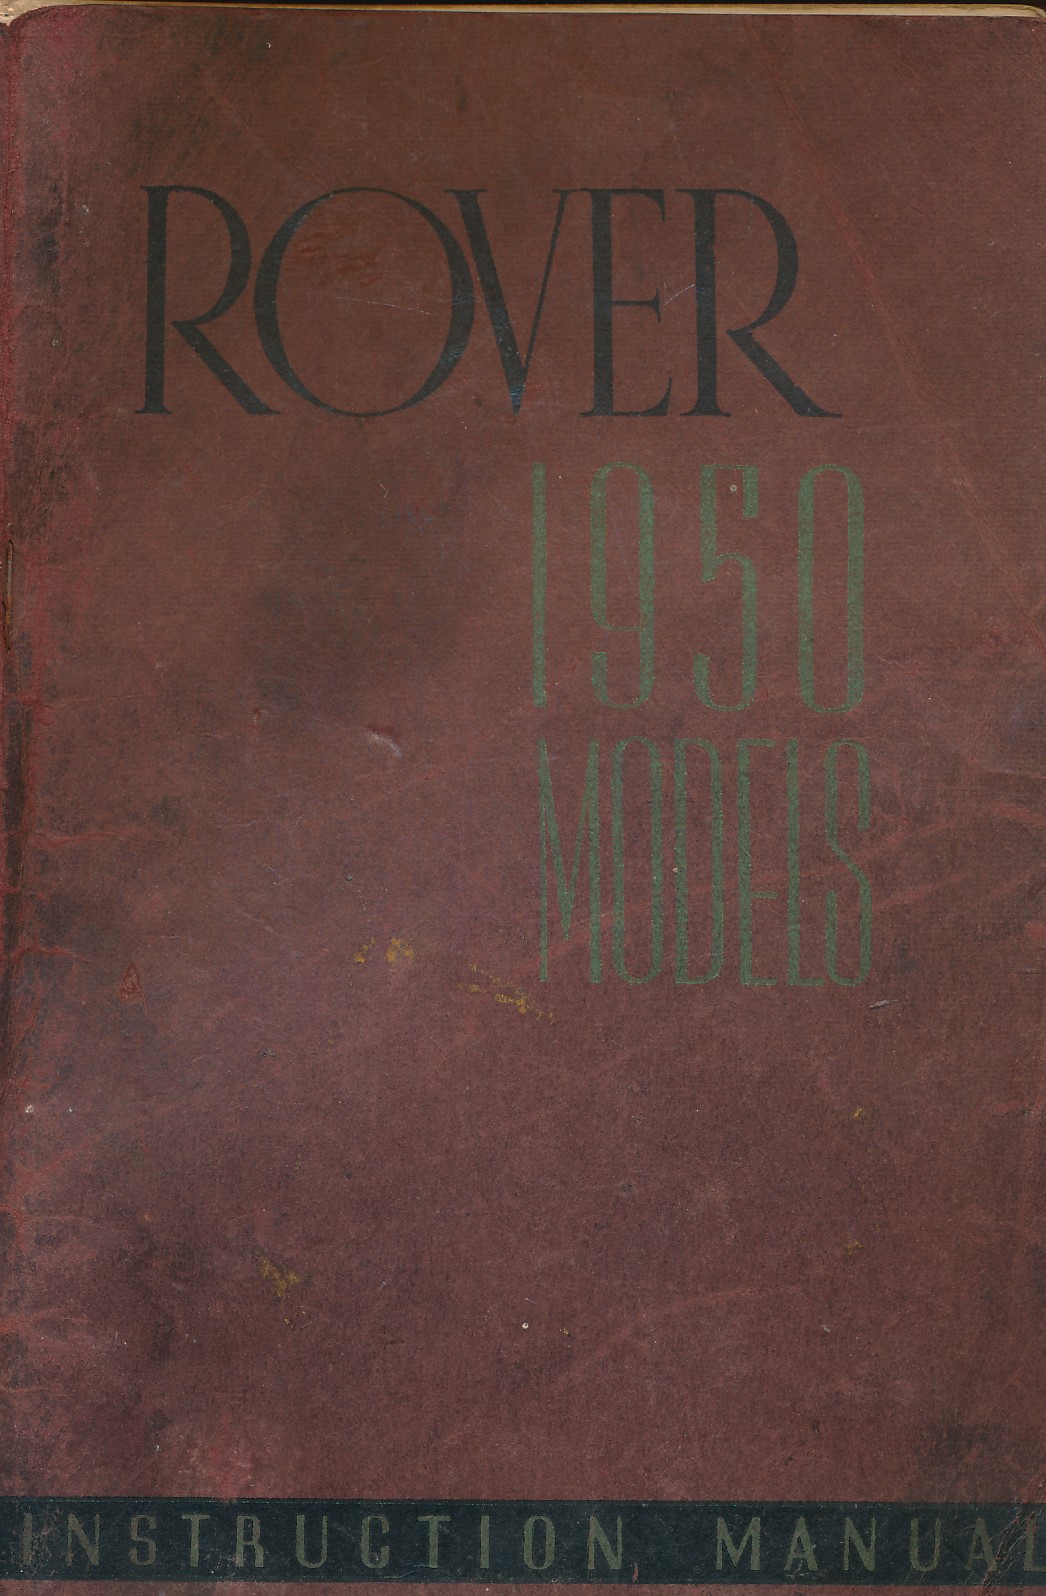 Manual of the Rover 1950 Models